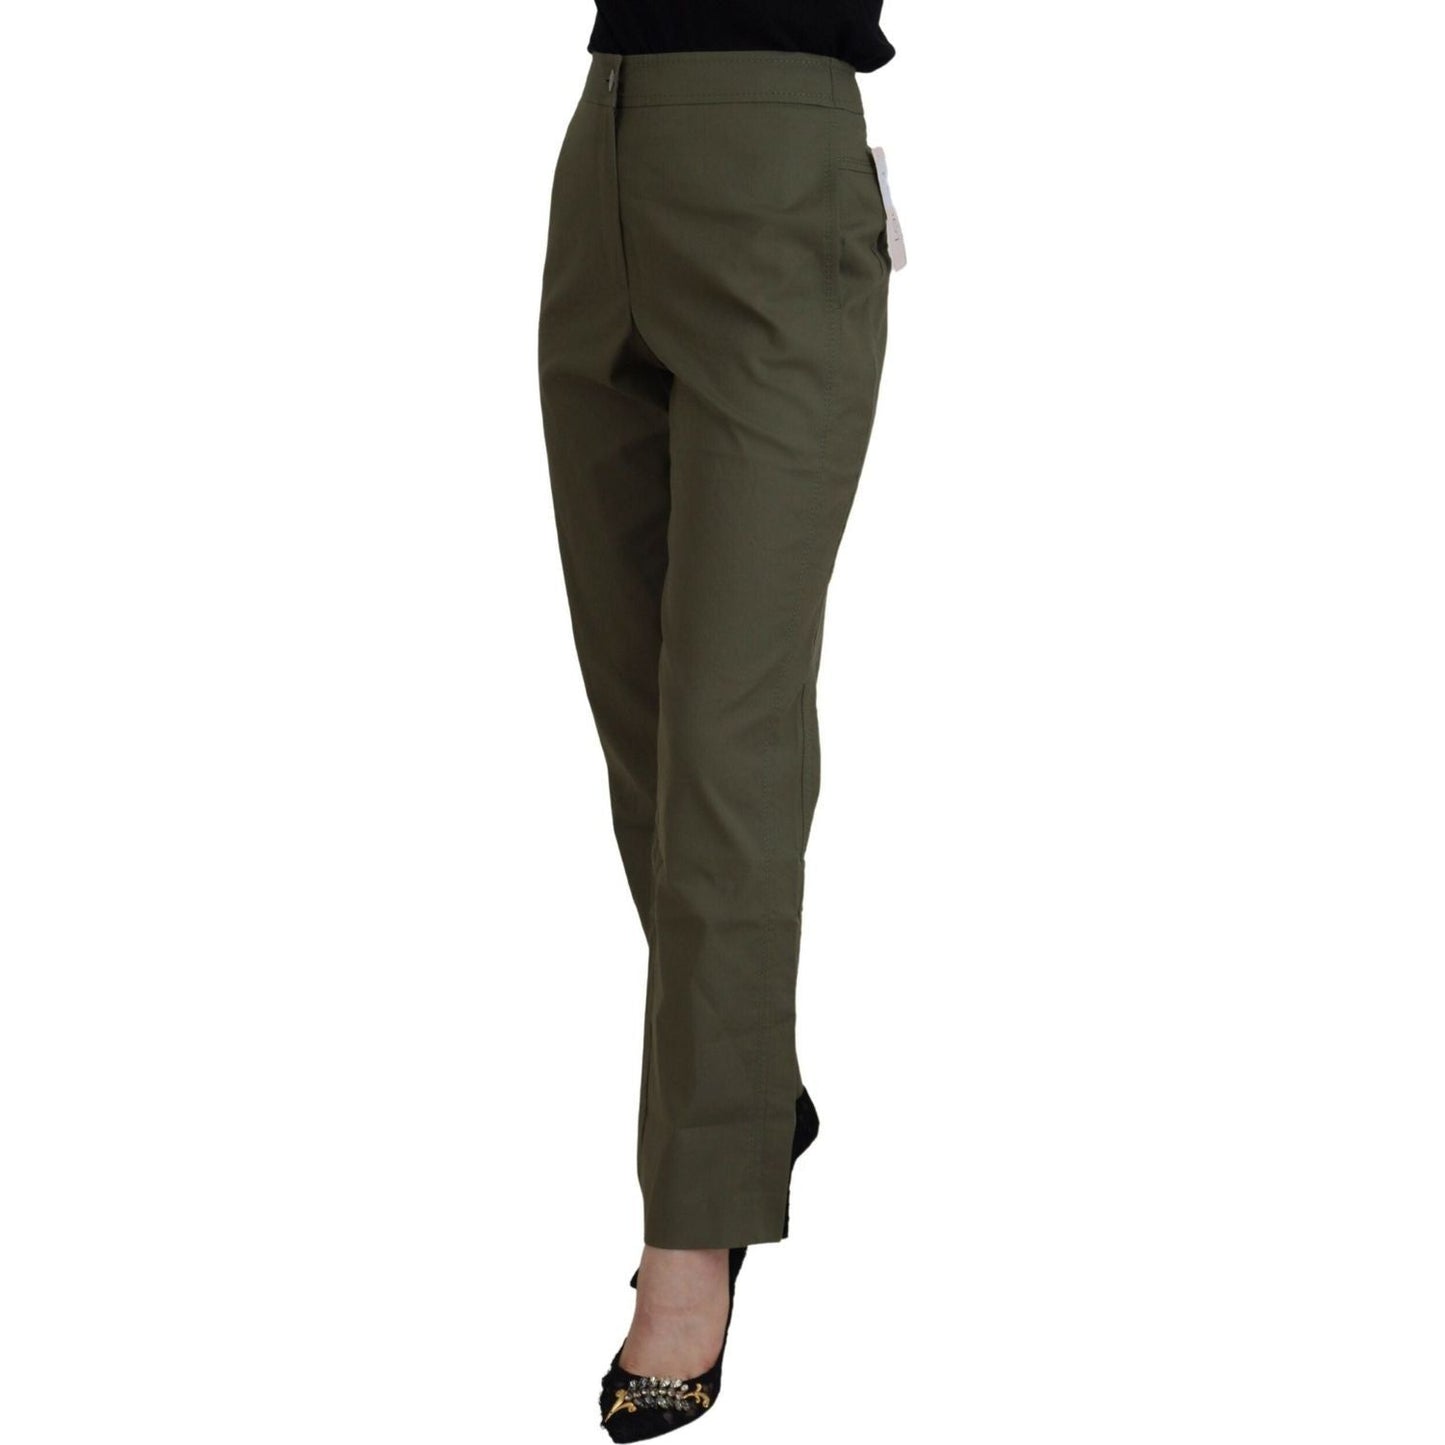 LAUREL Elegant Tapered Green Pants - Chic Everyday Wear green-cotton-high-waist-women-tapered-pants